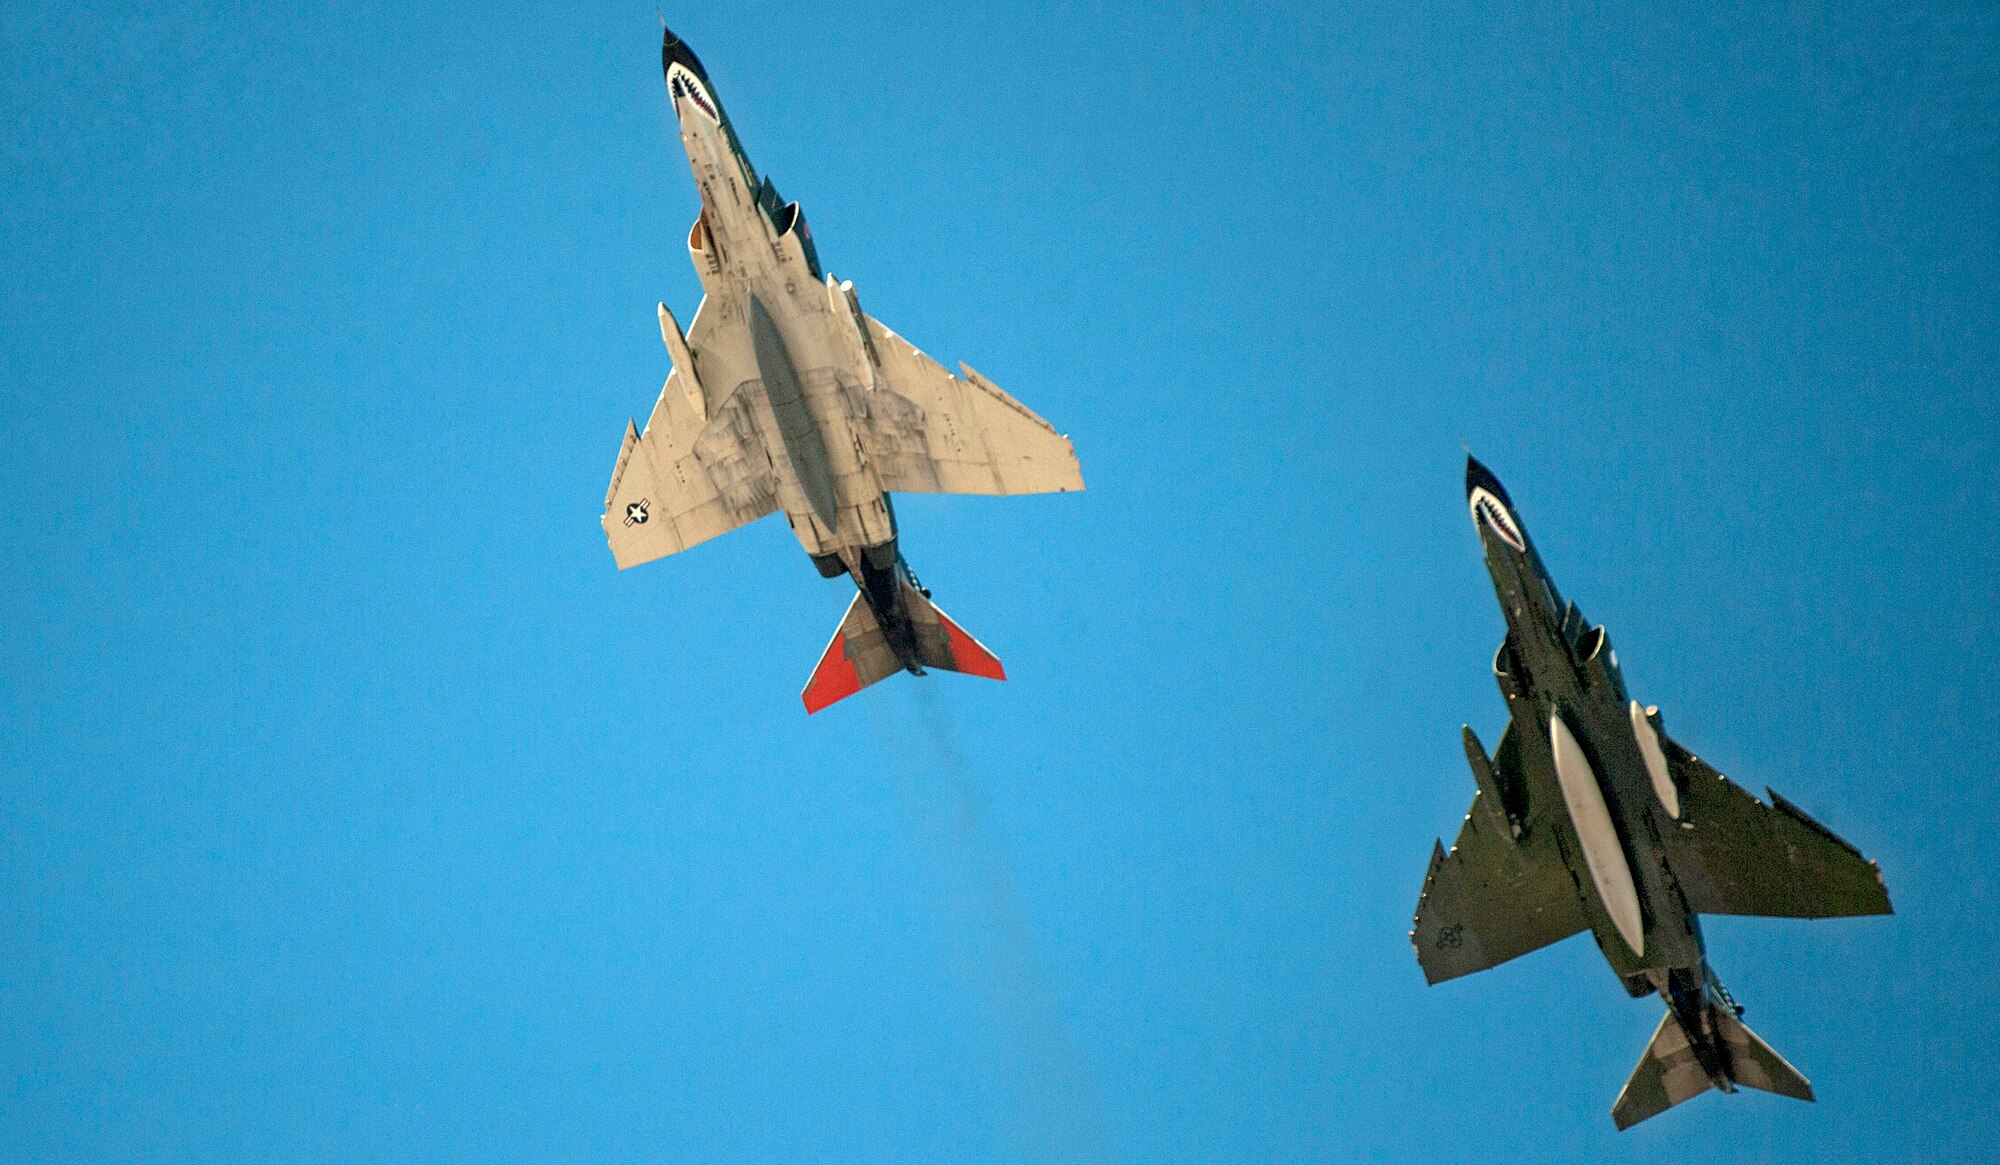 Lt. Col. Ron “Elvis” King and Jim Harkins, pilots from Holloman AFB, N.M., perform aerial acts in QF-4 Aerial Targets during the Aviation Nation air show on Nellis Air Force Base, Nev. Nov. 11, 2016. The event brought more than 295,000 spectators to view one of their final performances before retiring the aircraft. 